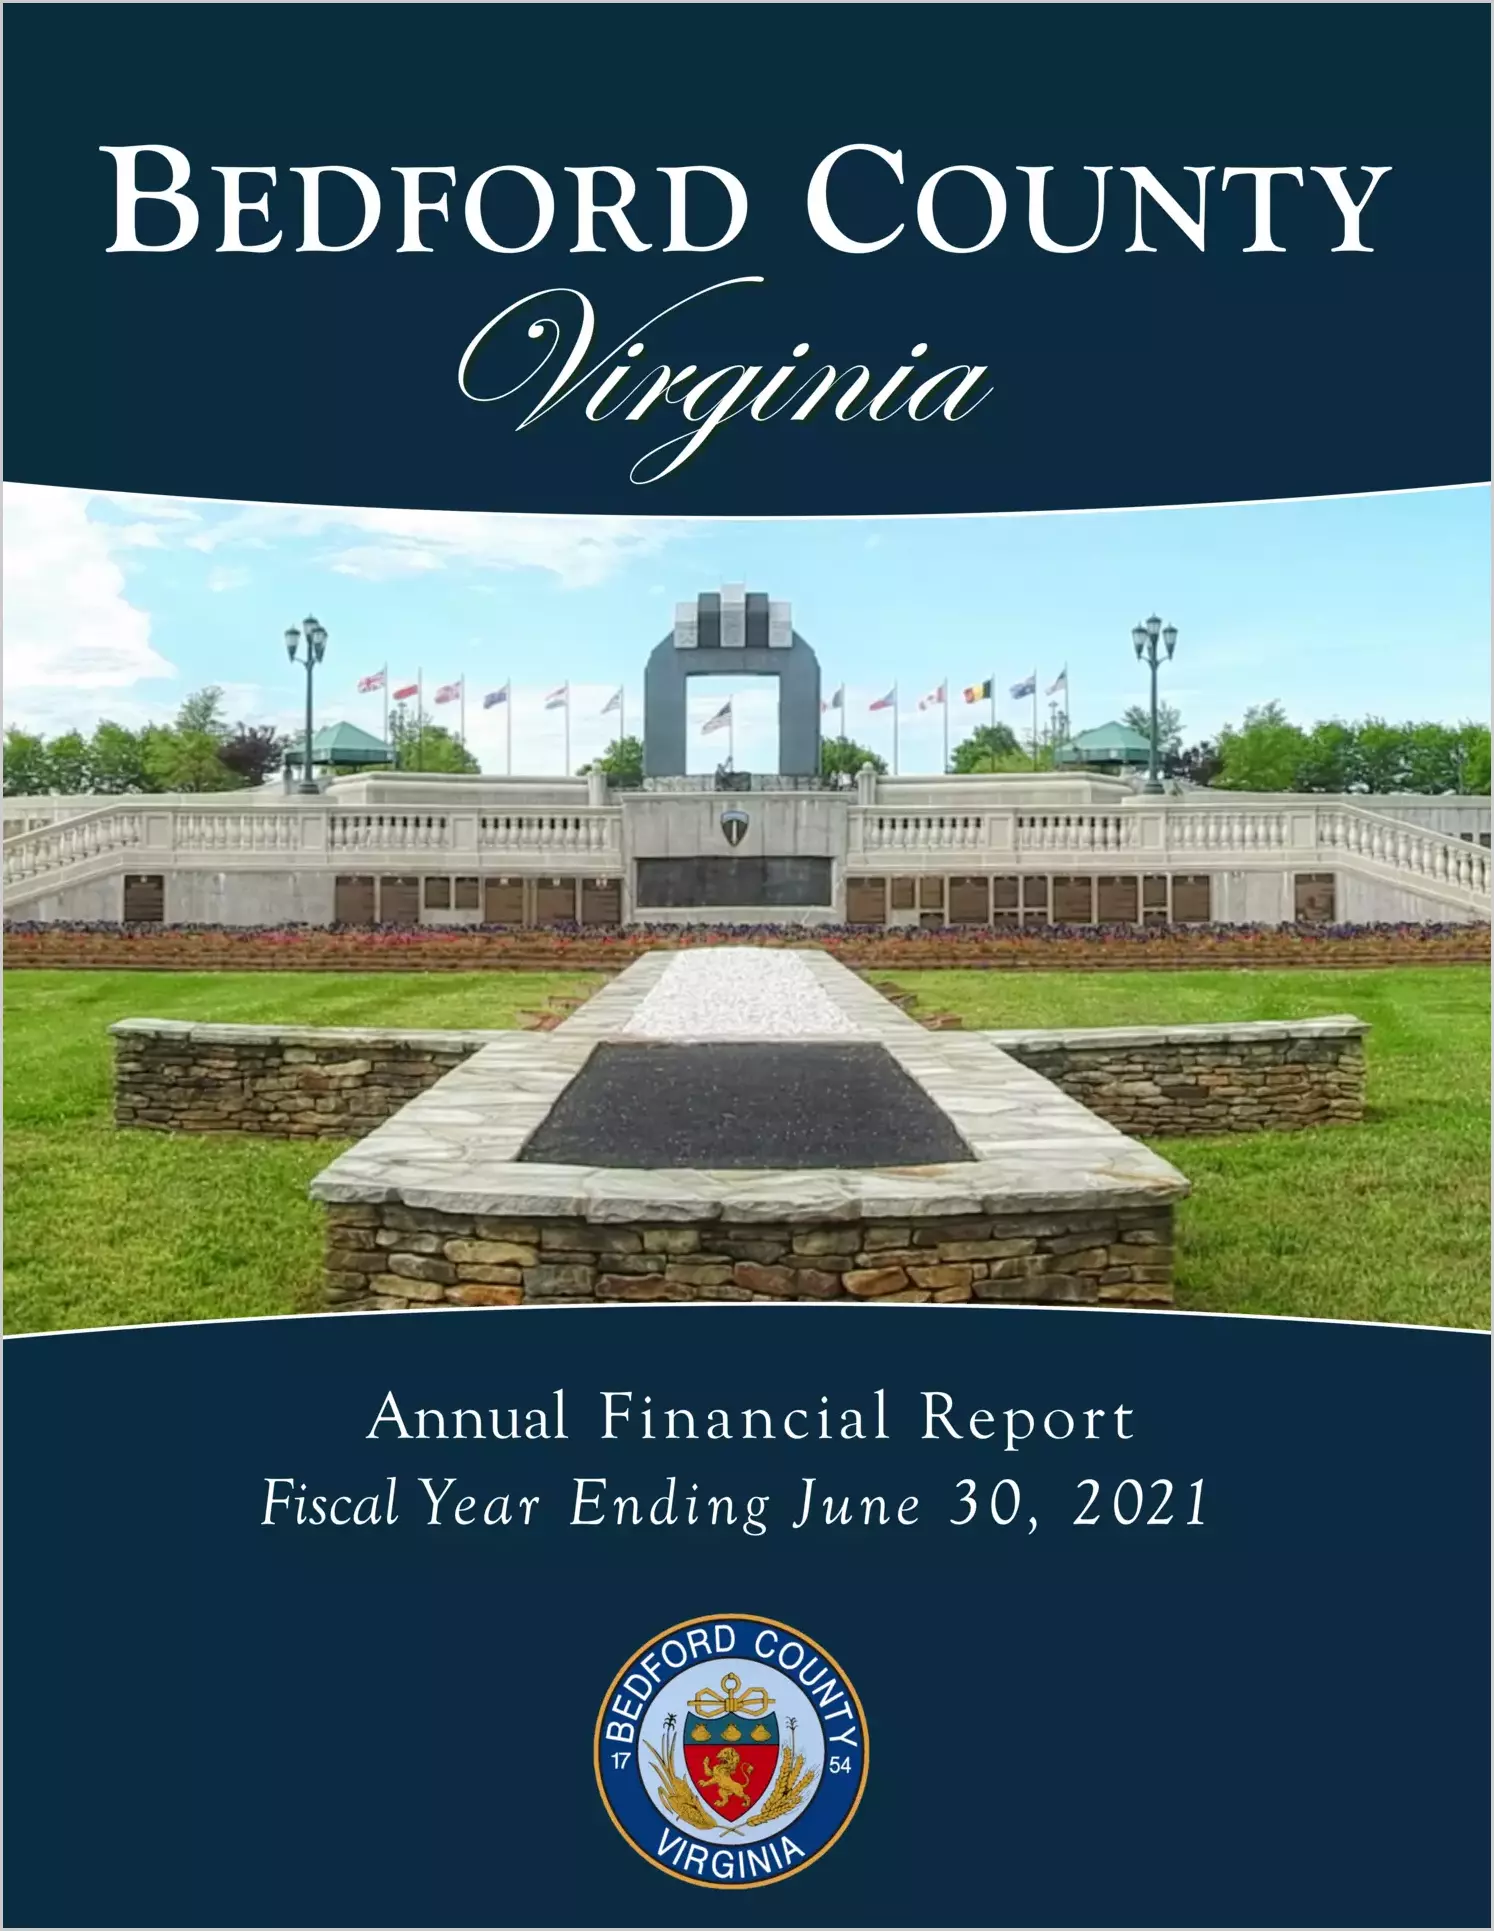 2021 Annual Financial Report for County of Bedford 